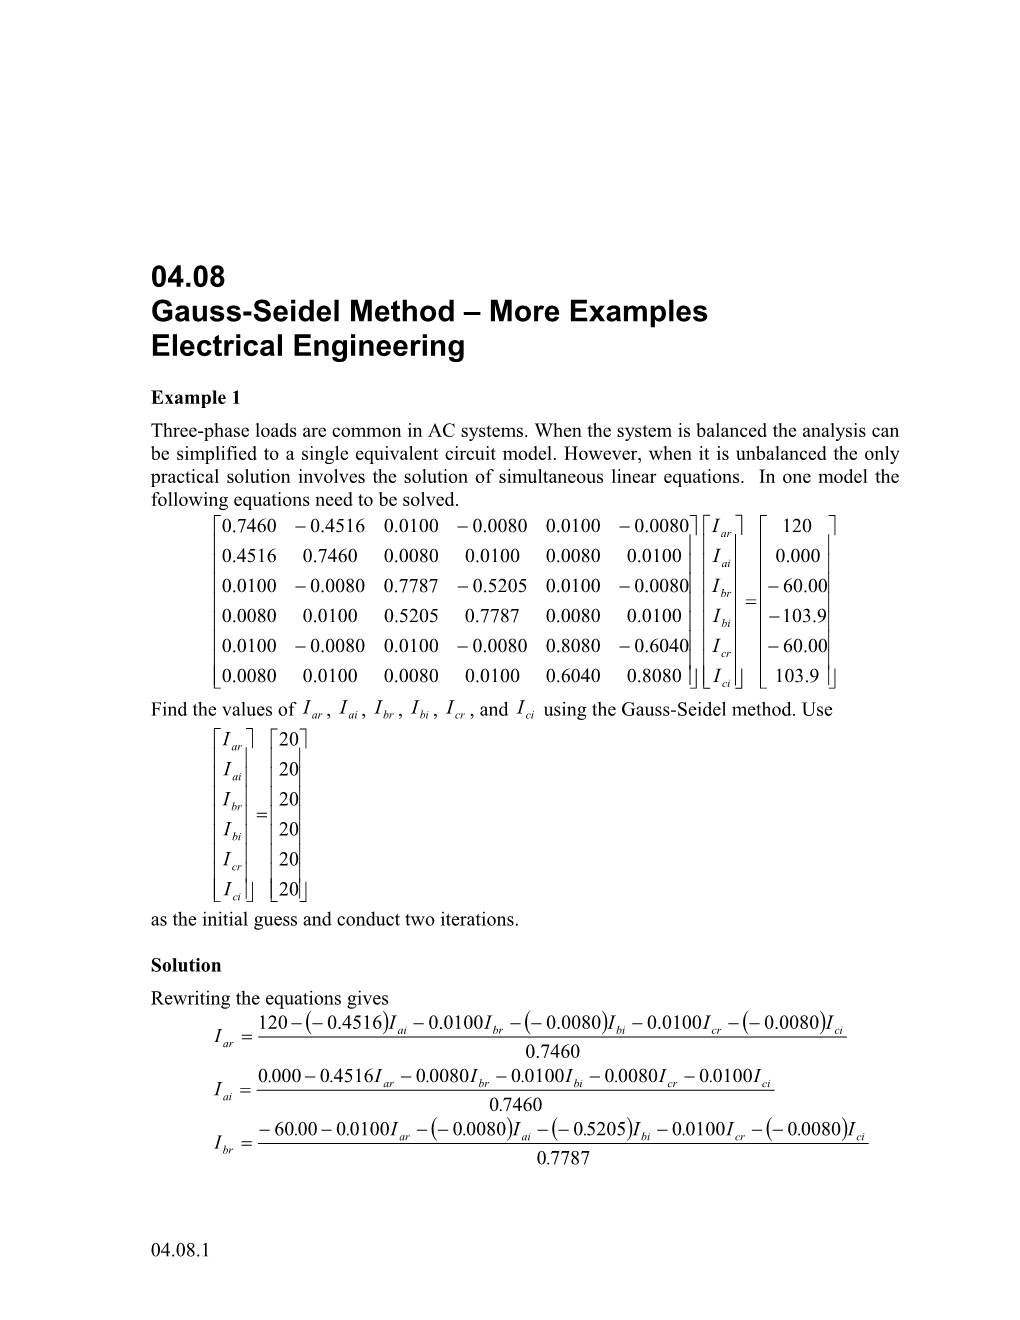 Gauss-Seidel-More Examples: Electrical Engineering